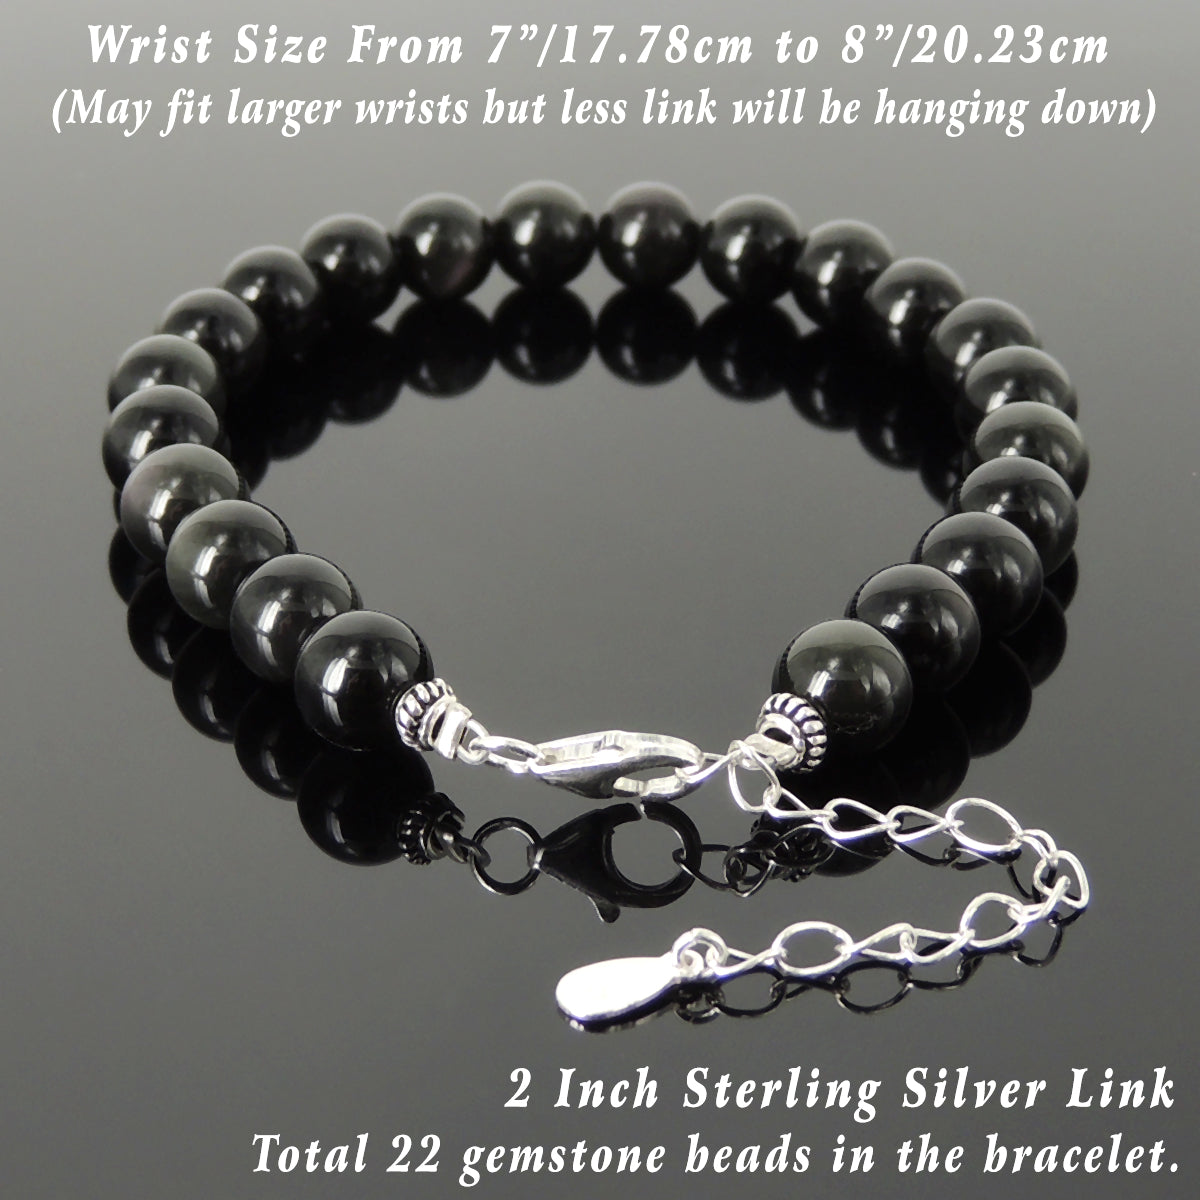 8mm Rainbow Black Obsidian Healing Gemstone Bracelet with S925 Sterling Silver Beads, Chain, & Clasp - Handmade by Gem & Silver BR1353